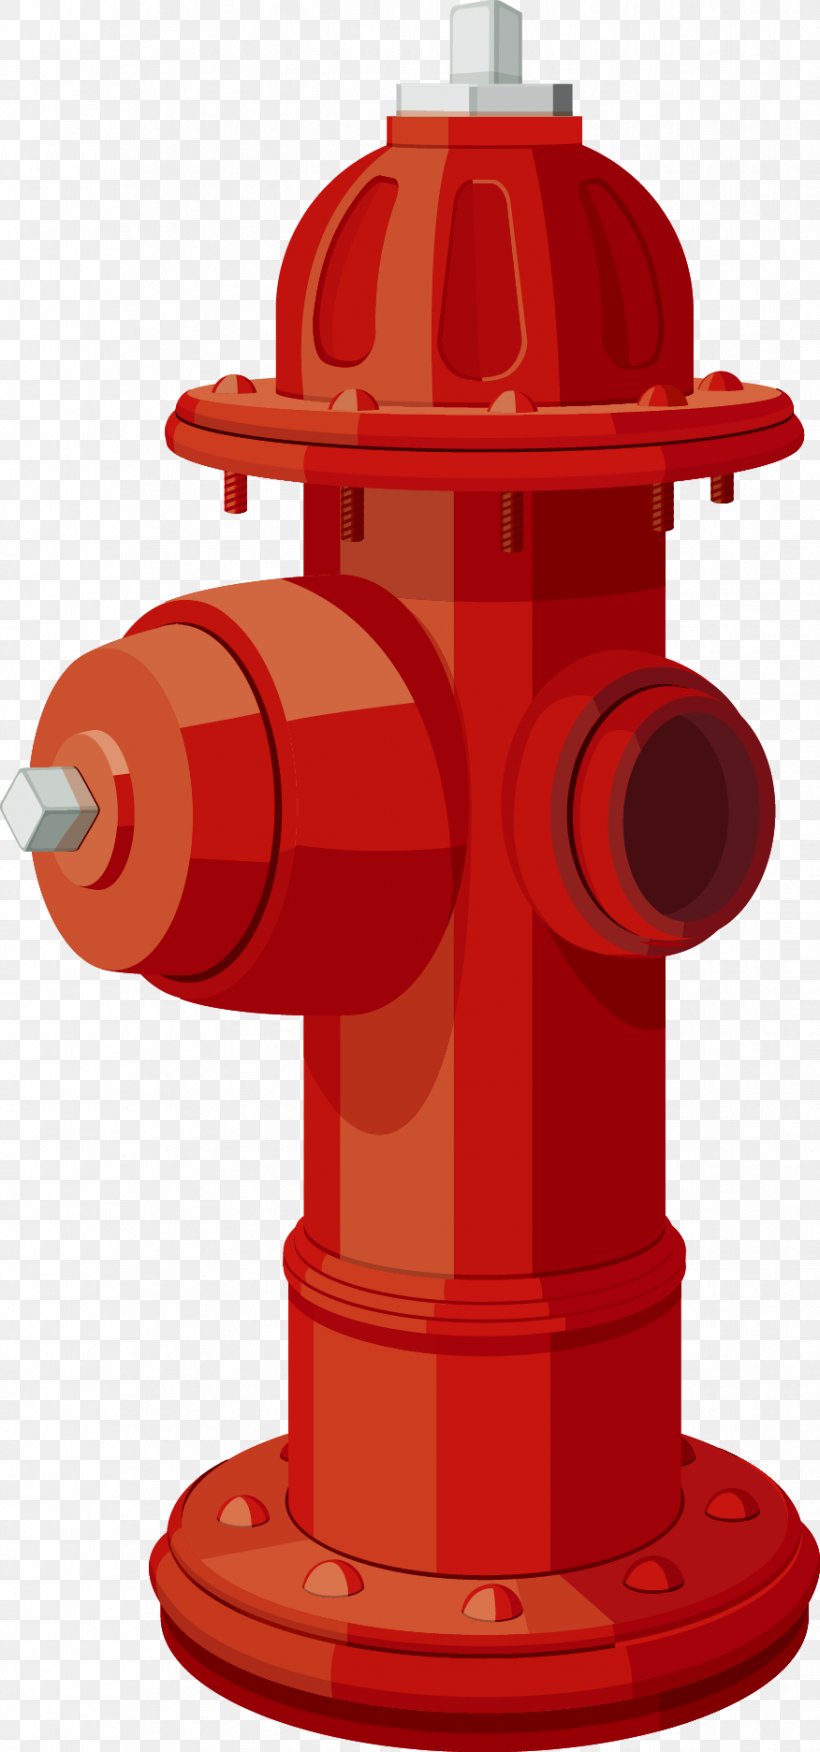 Fire Hydrant Firefighting Firefighter, PNG, 876x1872px, Fire Hydrant, Fire, Fire Extinguisher, Firefighter, Firefighting Download Free